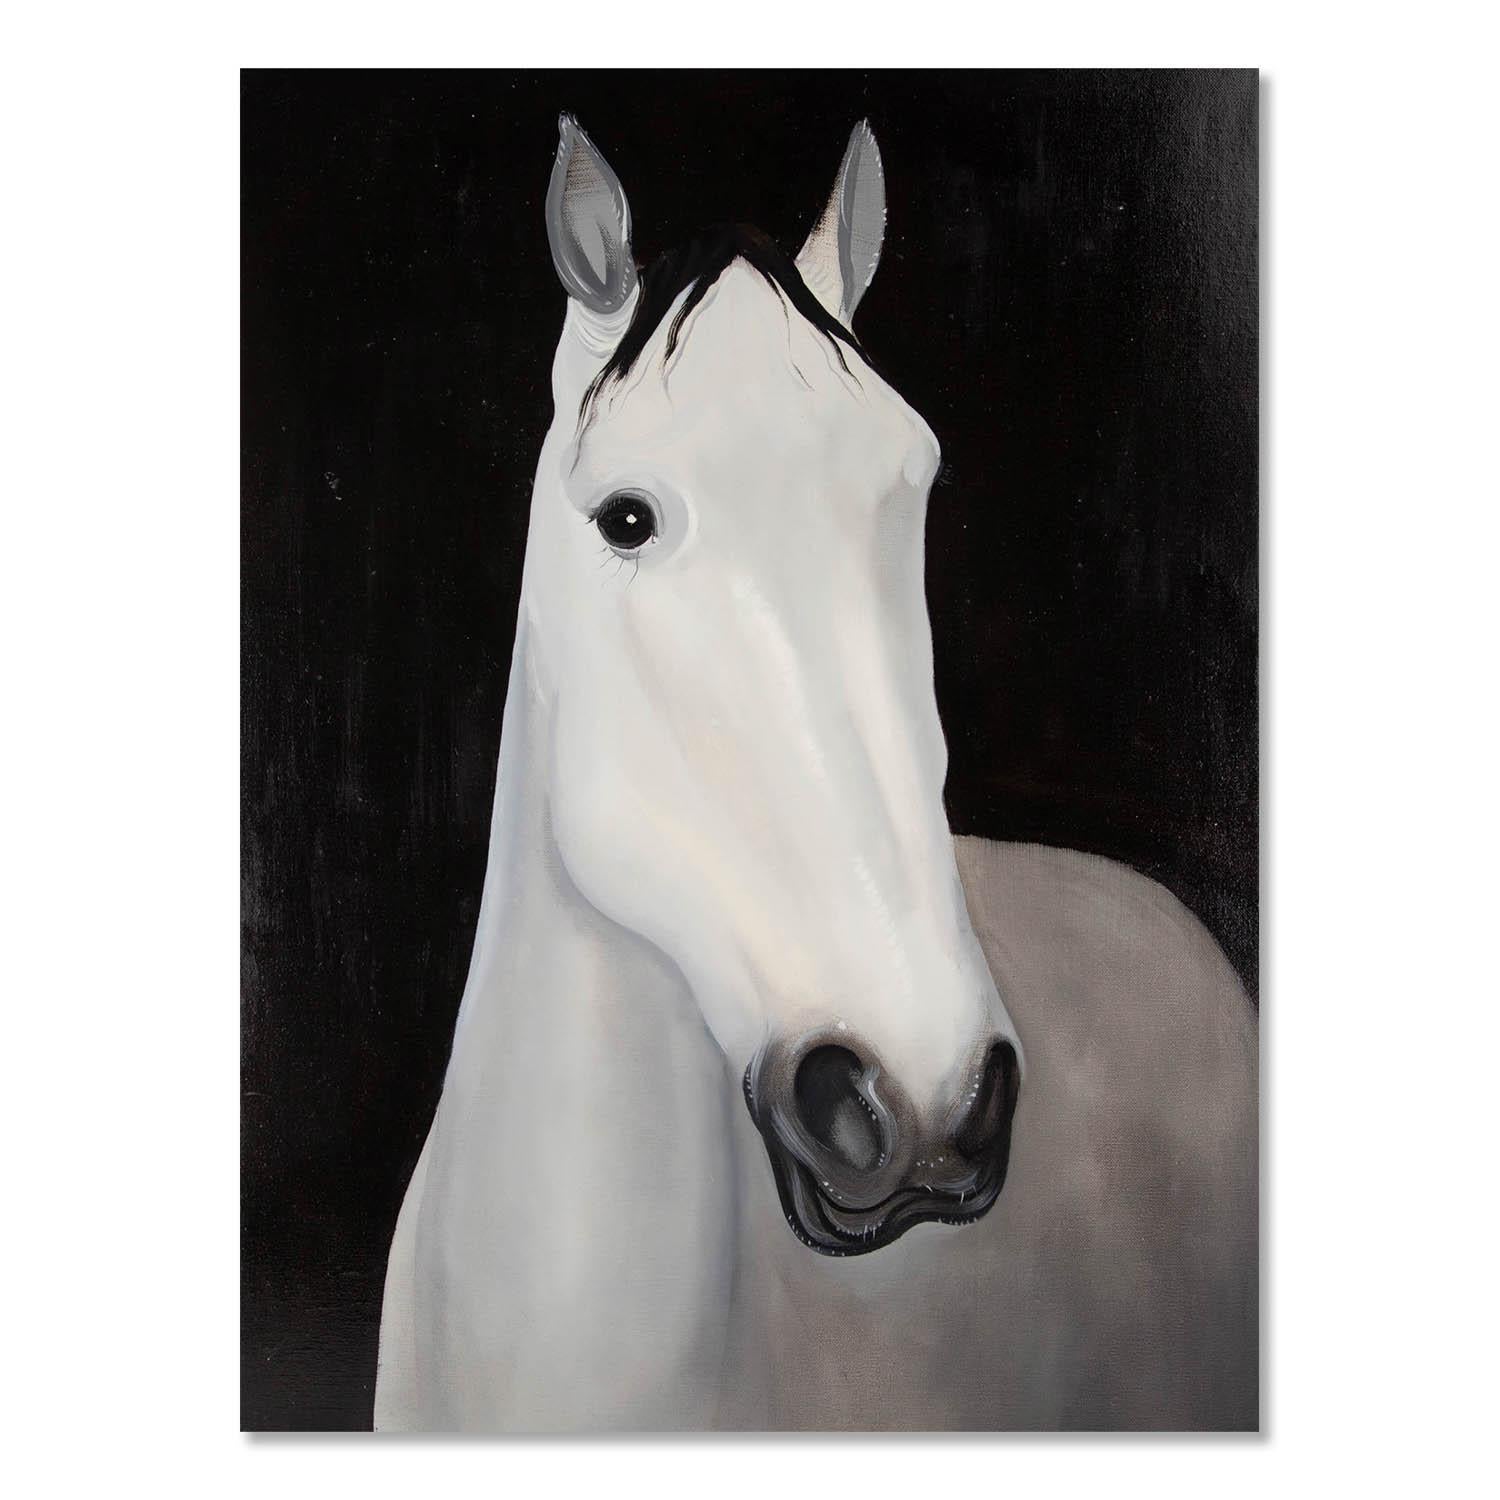  Title: Horse Series 7
 Medium: Oil on canvas
 Size: 31 x 23 inches
 Frame: Framing options available!
 Condition: The painting appears to be in excellent condition.
 
 Year: 2000 Circa
 Artist: Zhenpeng Zhou
 Signature: Unsigned
 Signature